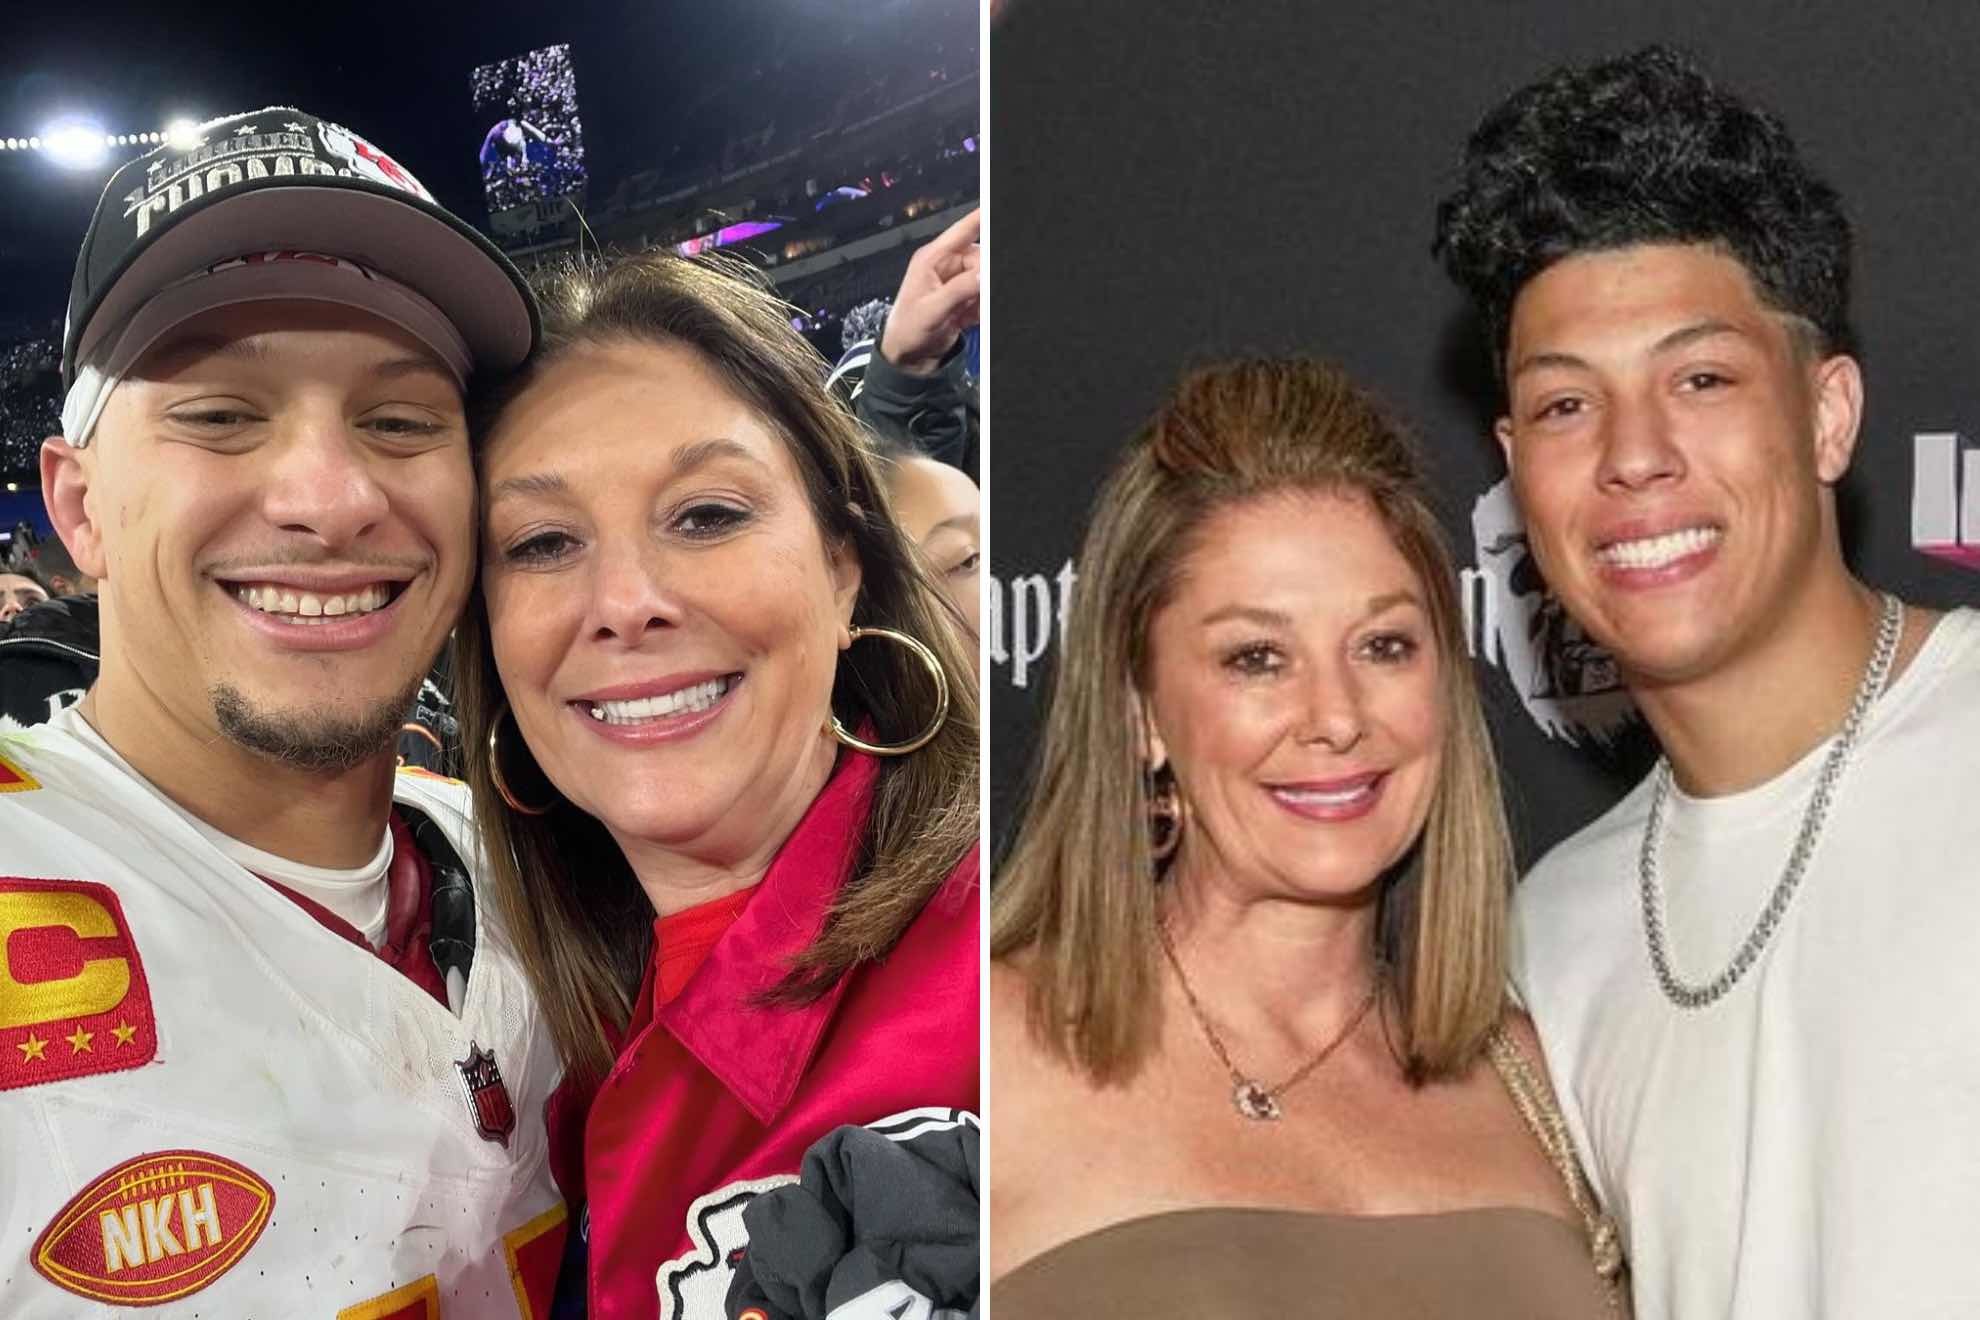 Randi Mahomes exemplified work ethic to her sons Patrick and Jackson Mahomes